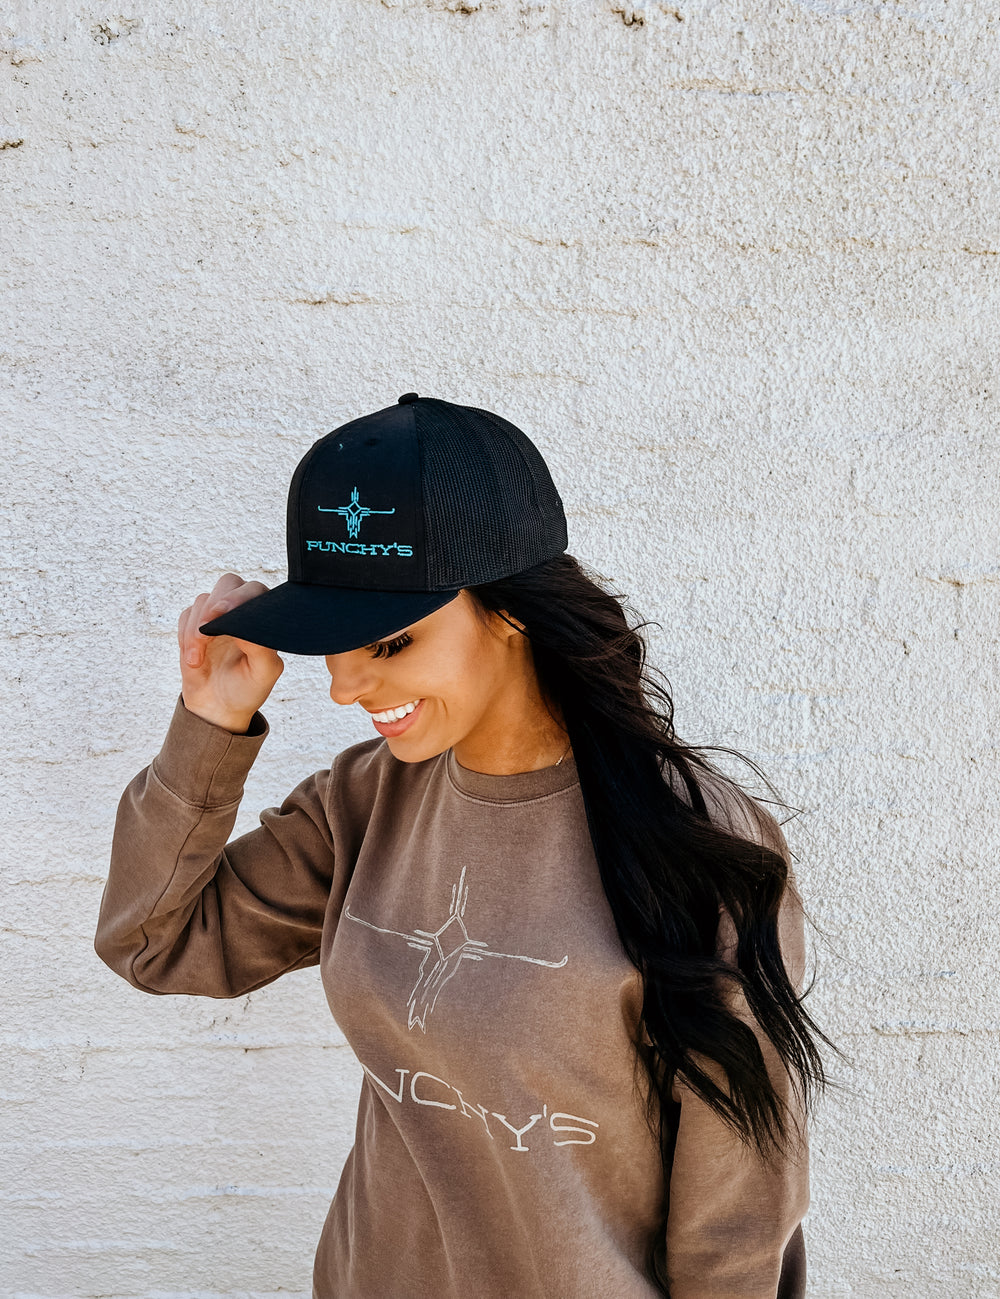 Punchy's Trucker Caps Black/Black with Turquoise Embroidery